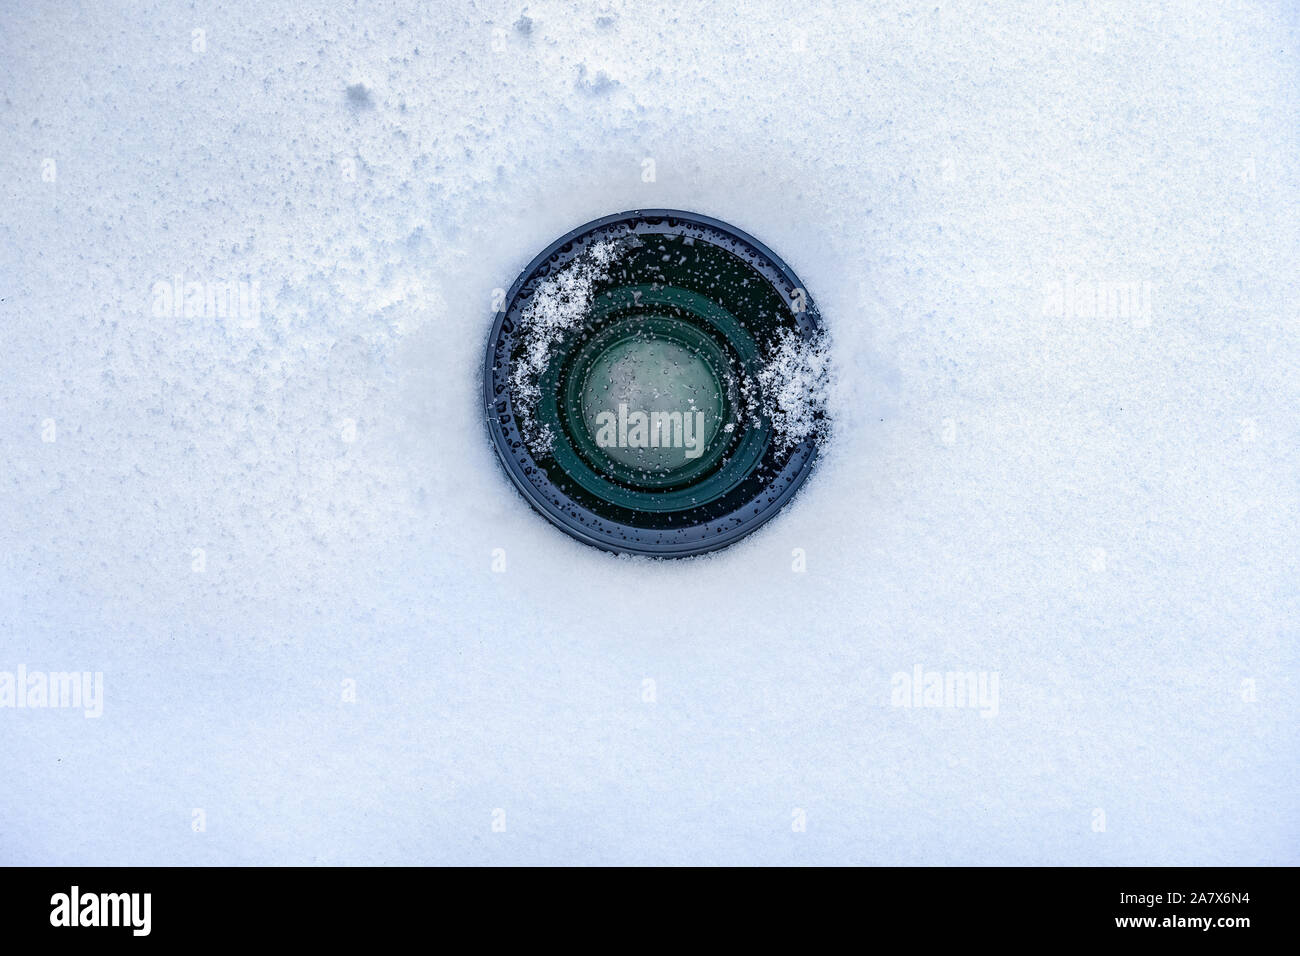 Espionage background. Hidden camera lens in the snow. Black lens of the secret camera is hidden in the snow. Copy space Stock Photo